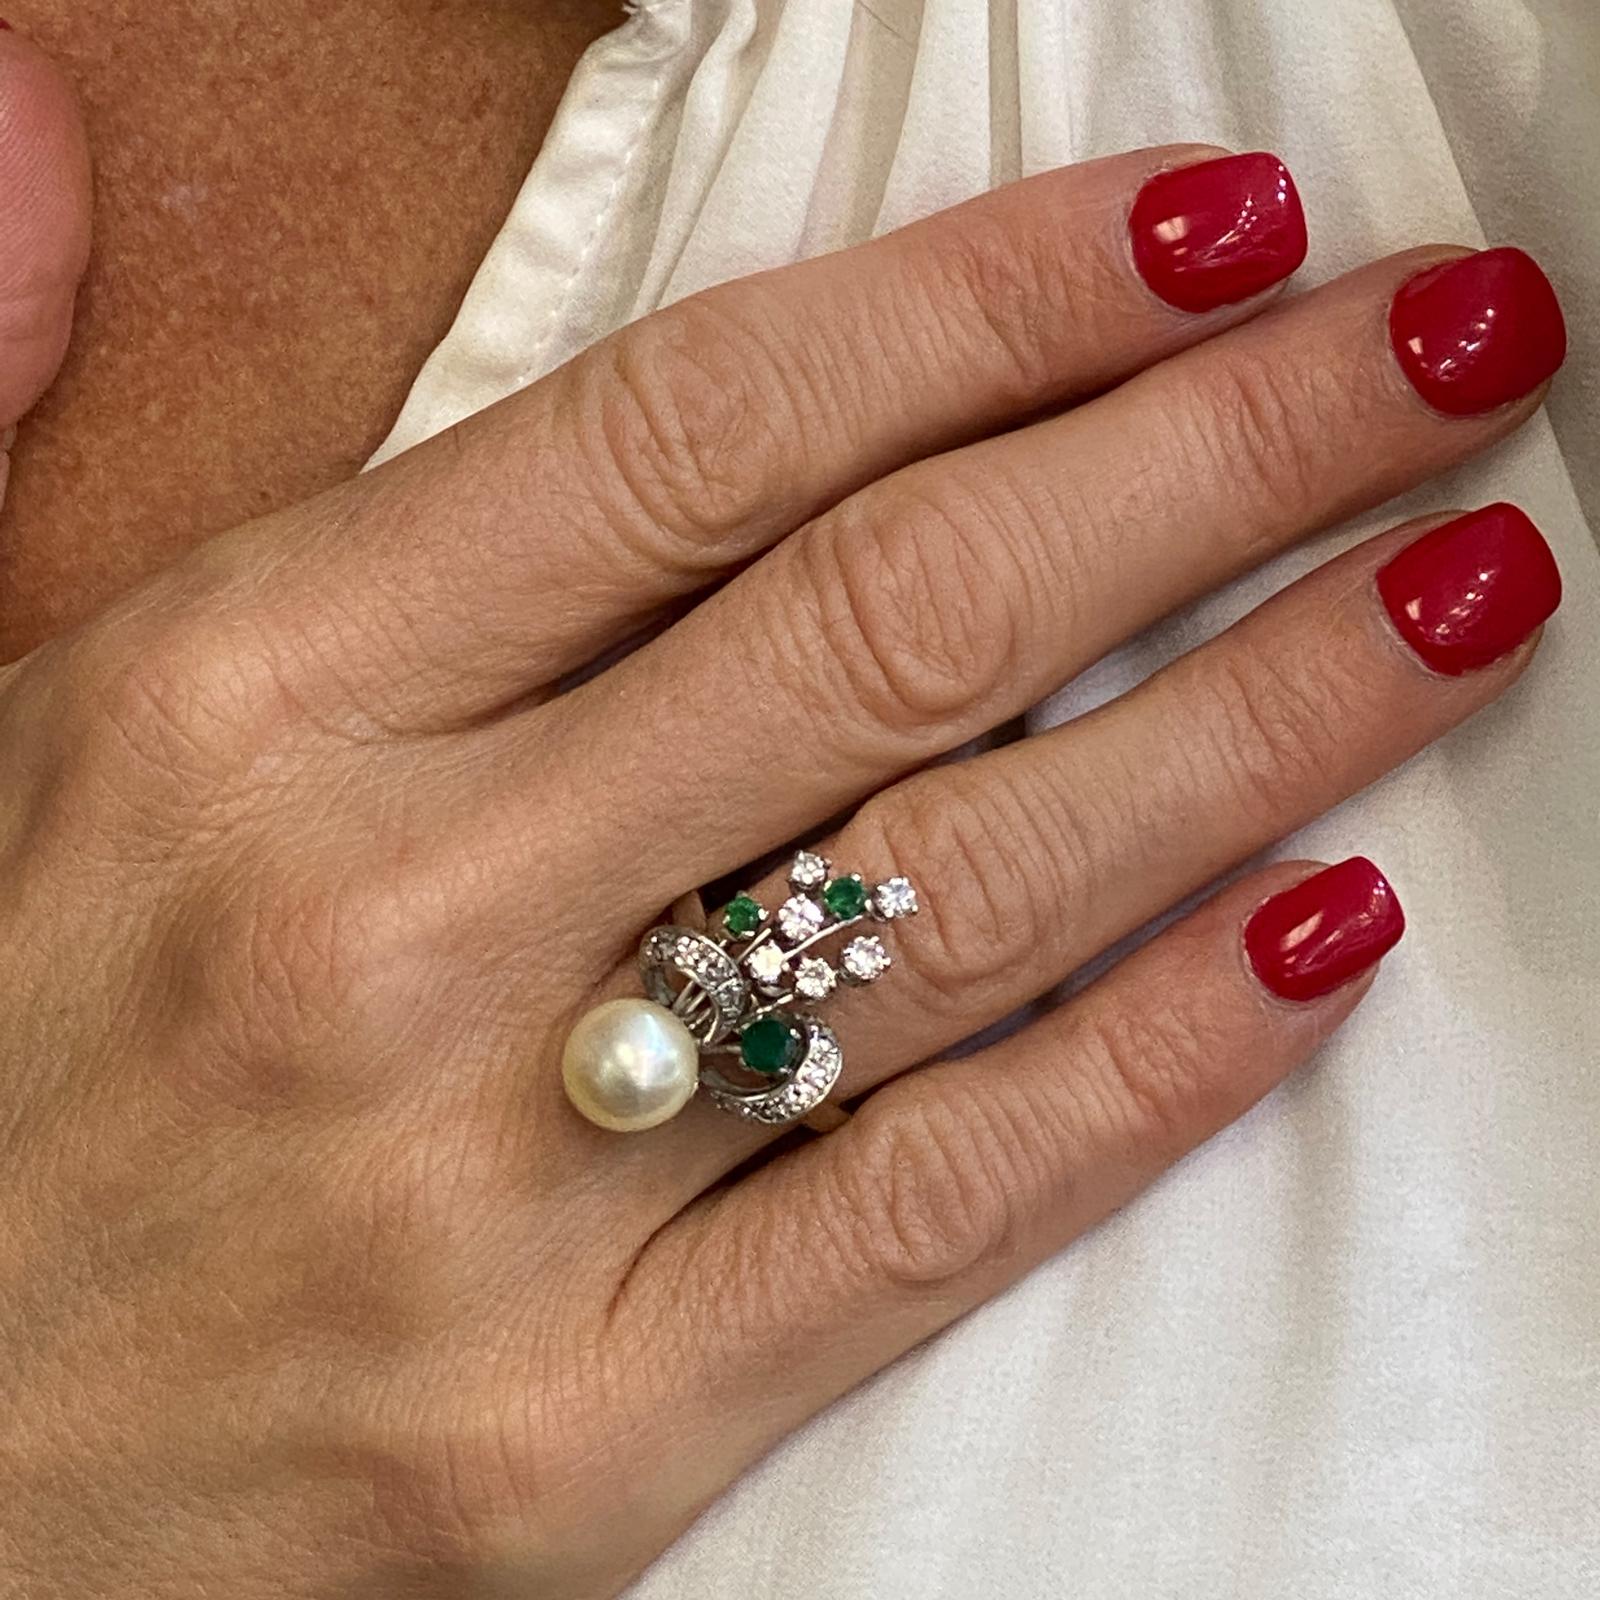 1940's diamond, emerald, and pearl vintage cocktail ring fashioned in 14 karat white gold. The ring features 20 round brilliant cut diamonds weighing .80 CTW, 3 round emeralds, and an 8.8mm cultured pearl. The top of the ring measures 15 x 28mm, and